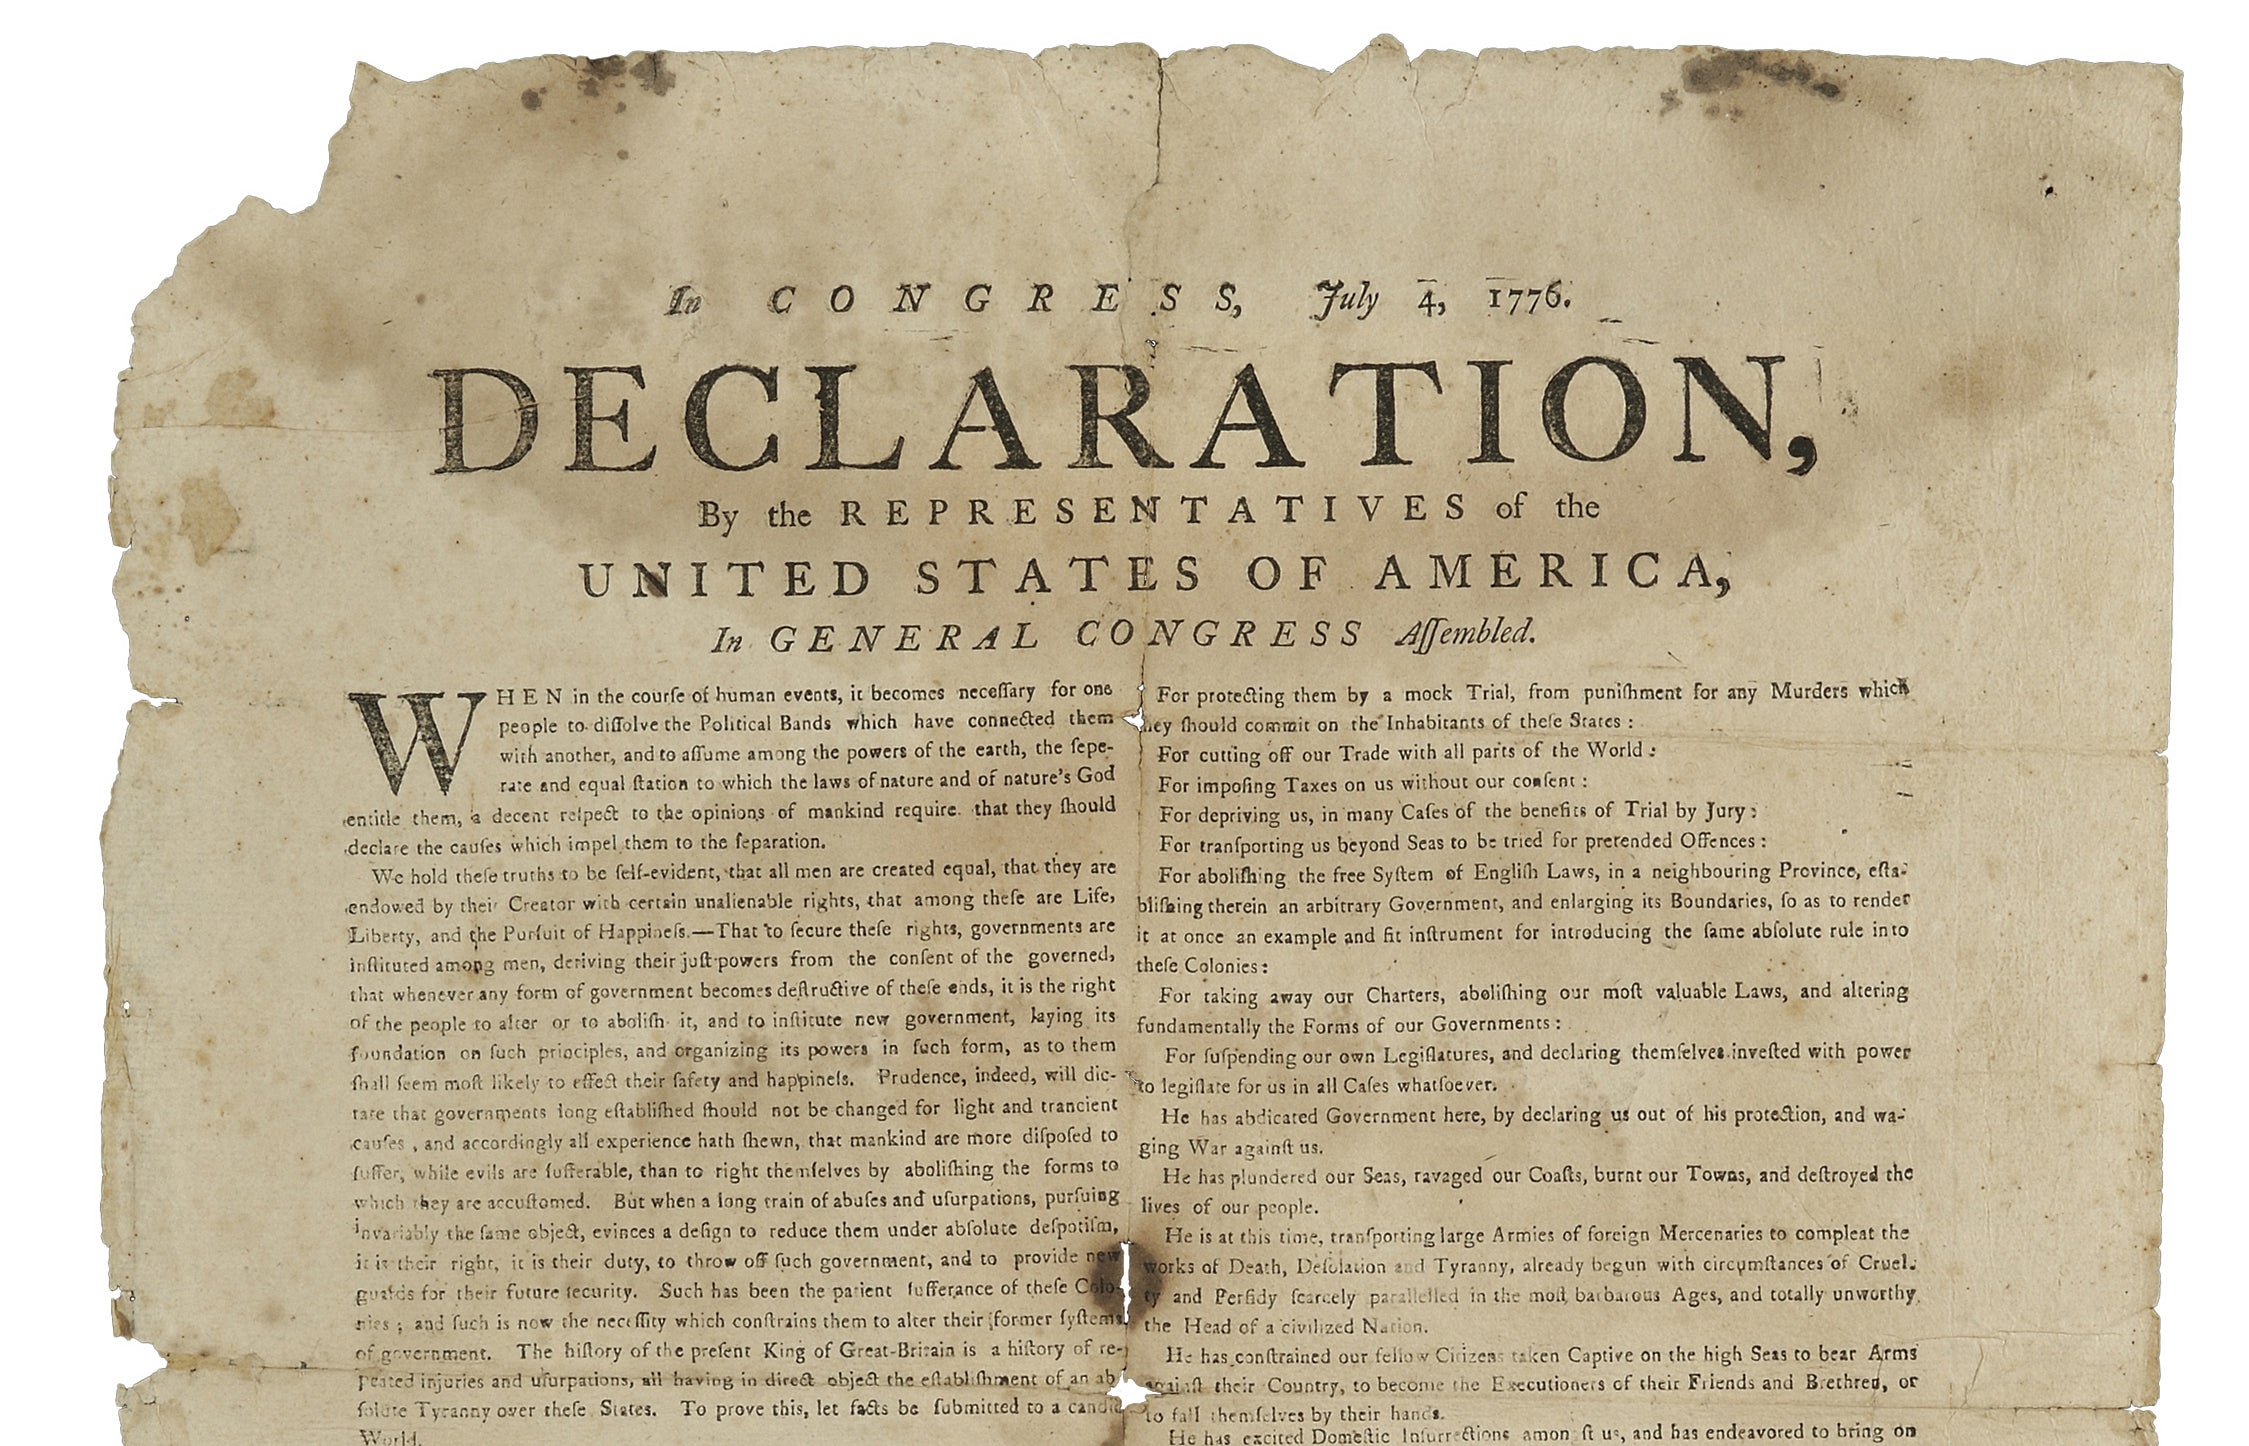 Where Can I Get A Copy Of The Declaration Of Independence